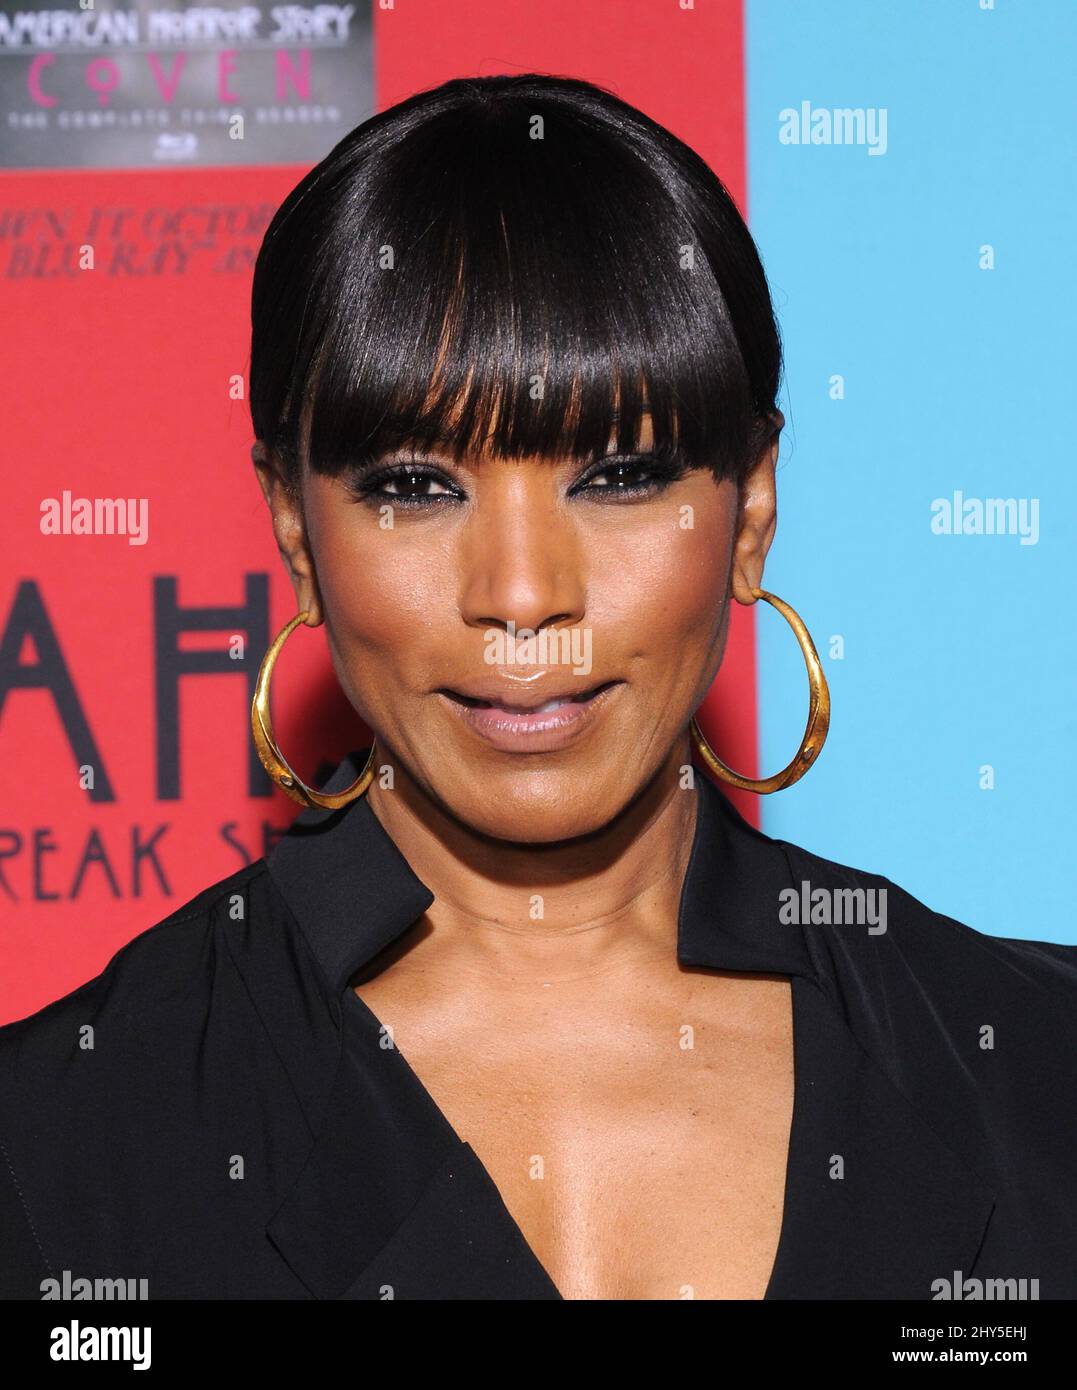 Angela Bassett Attends The American Horror Story Freak Show Season Premiere At The Chinese